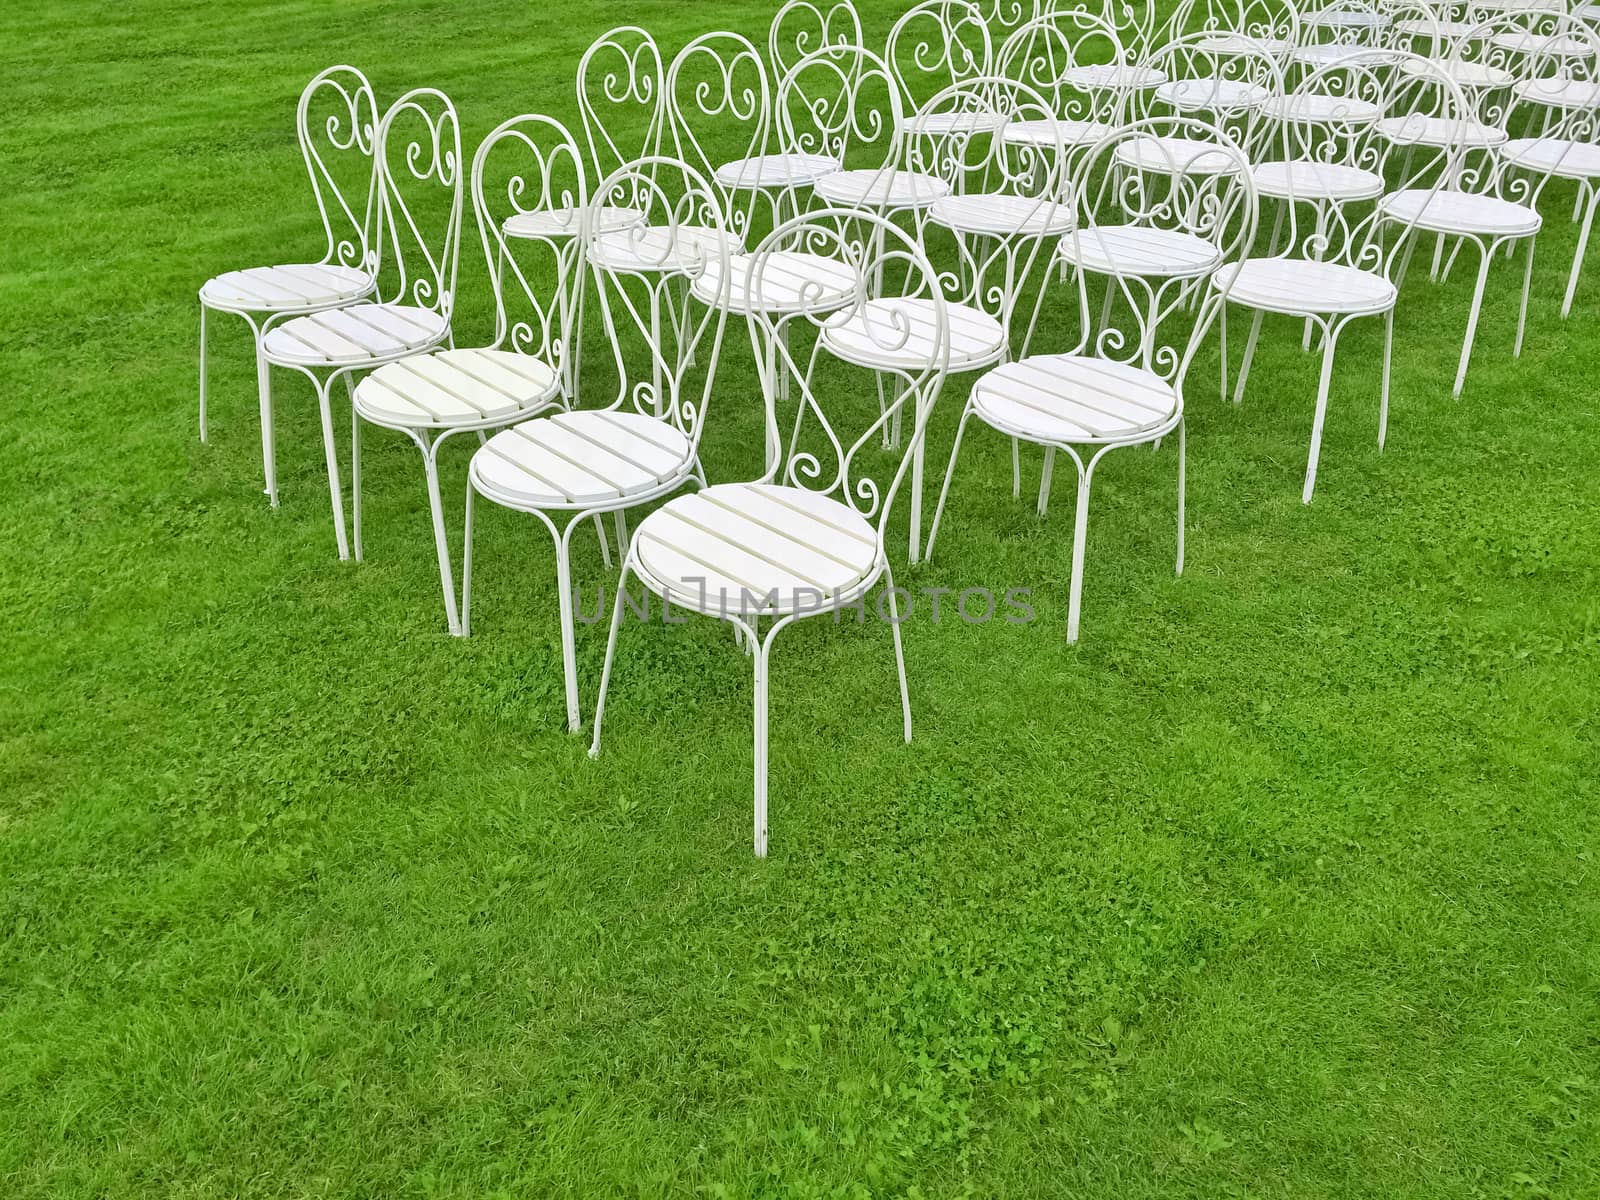 Rows of white chairs in the green field.